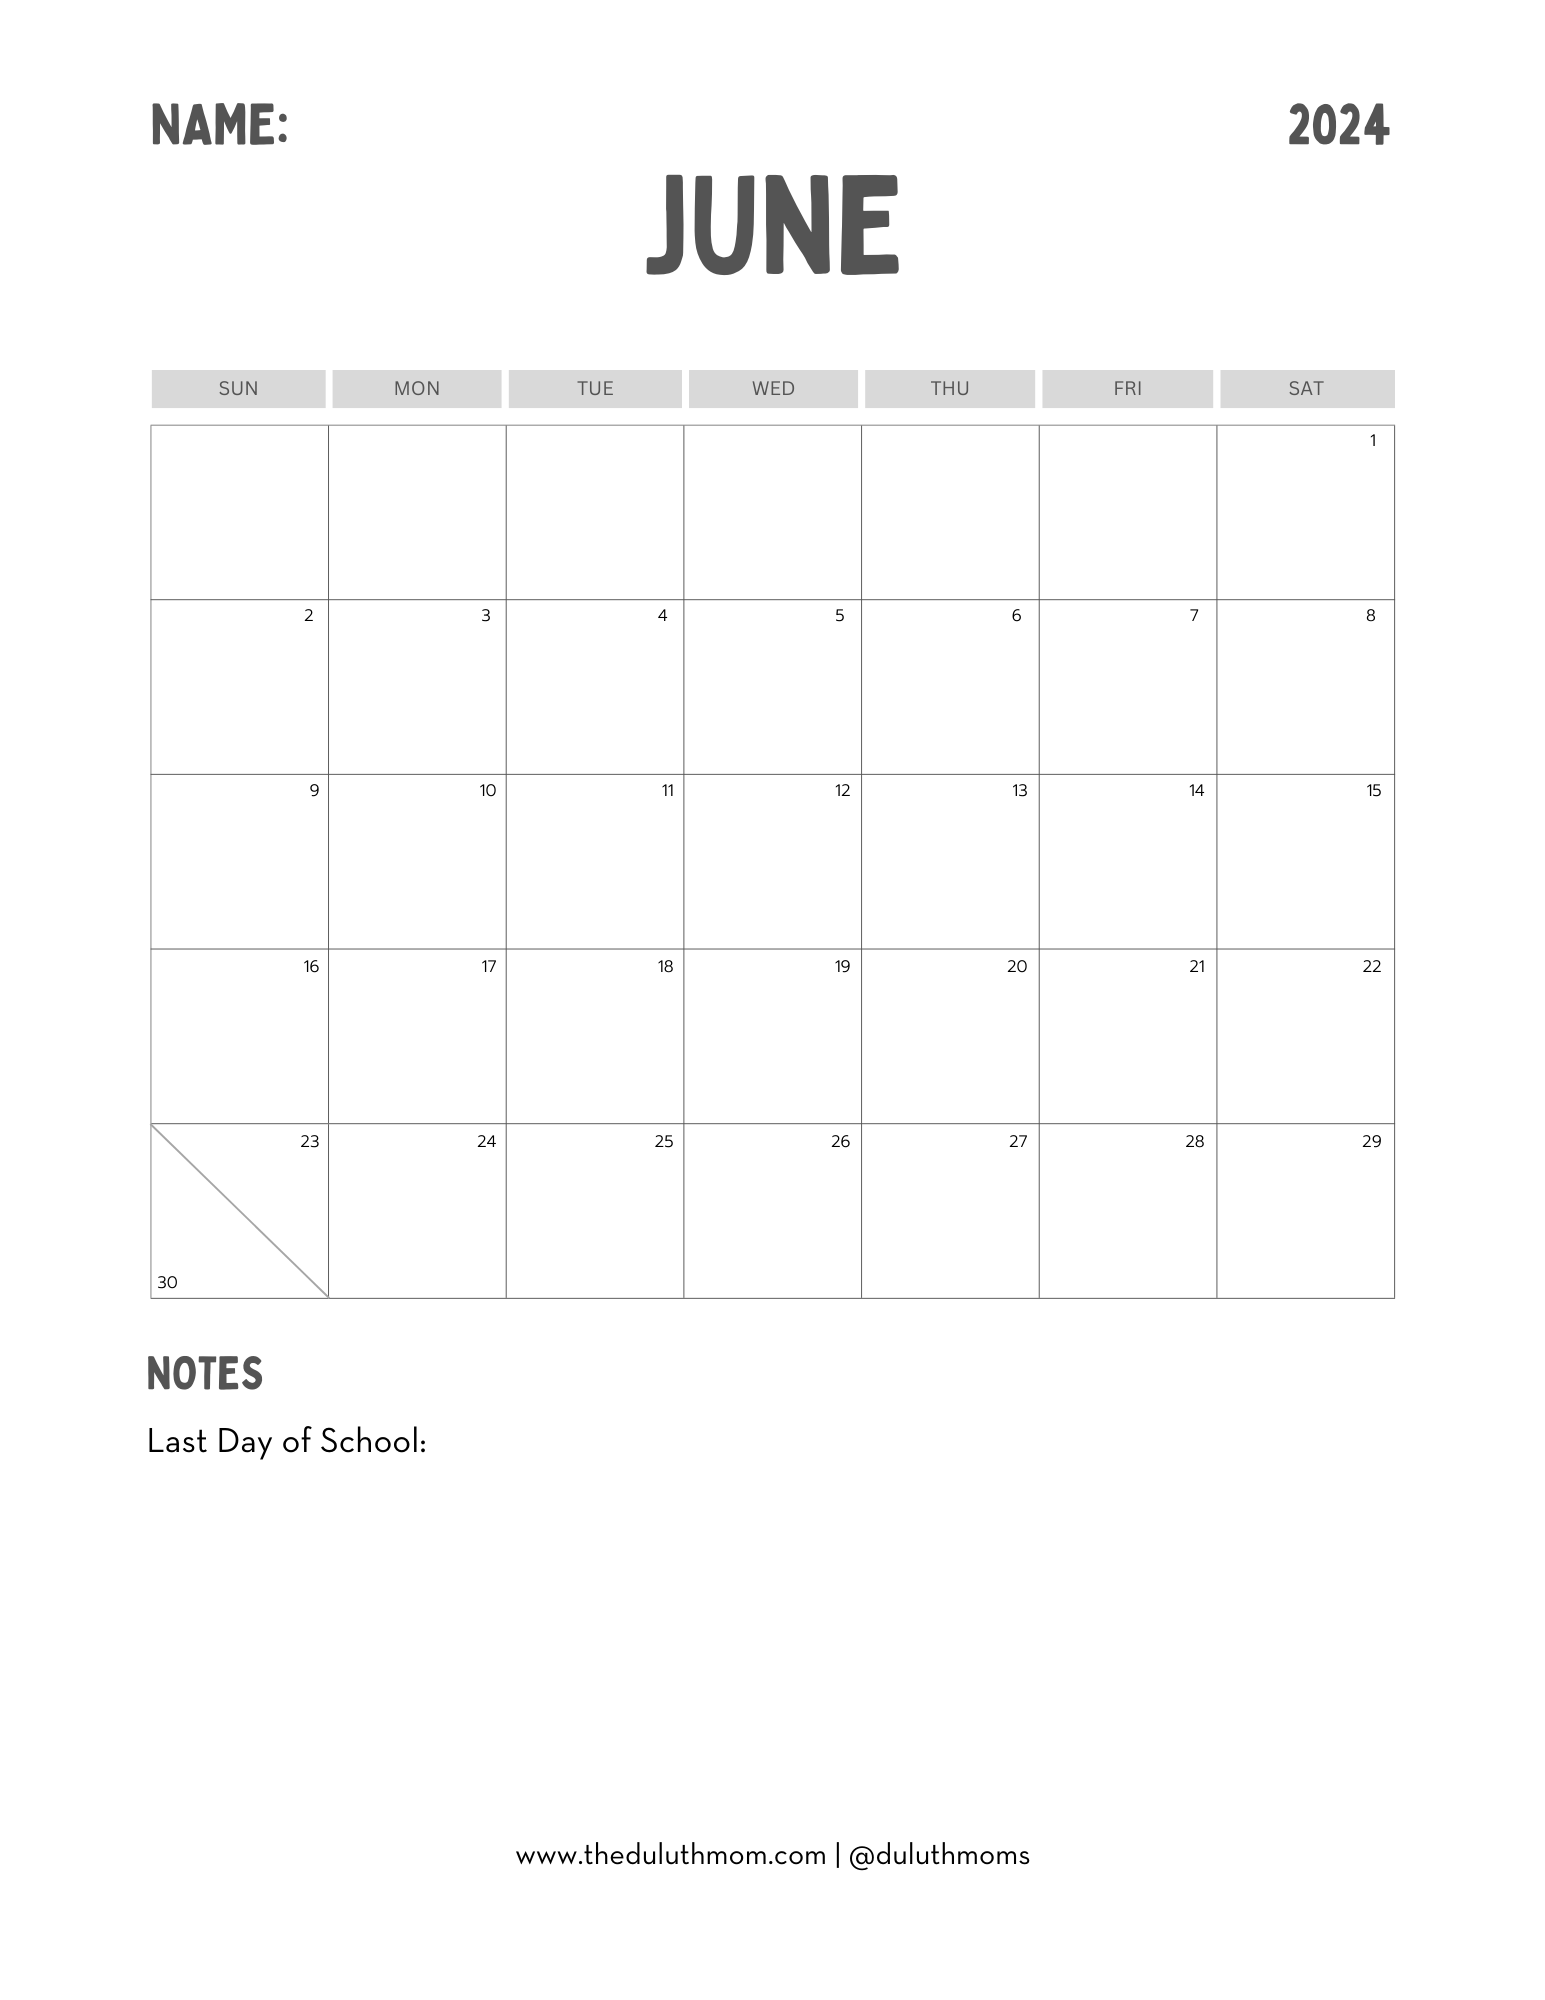 The calendar month of June 2024 calendar image printable for planning summer camps for your family